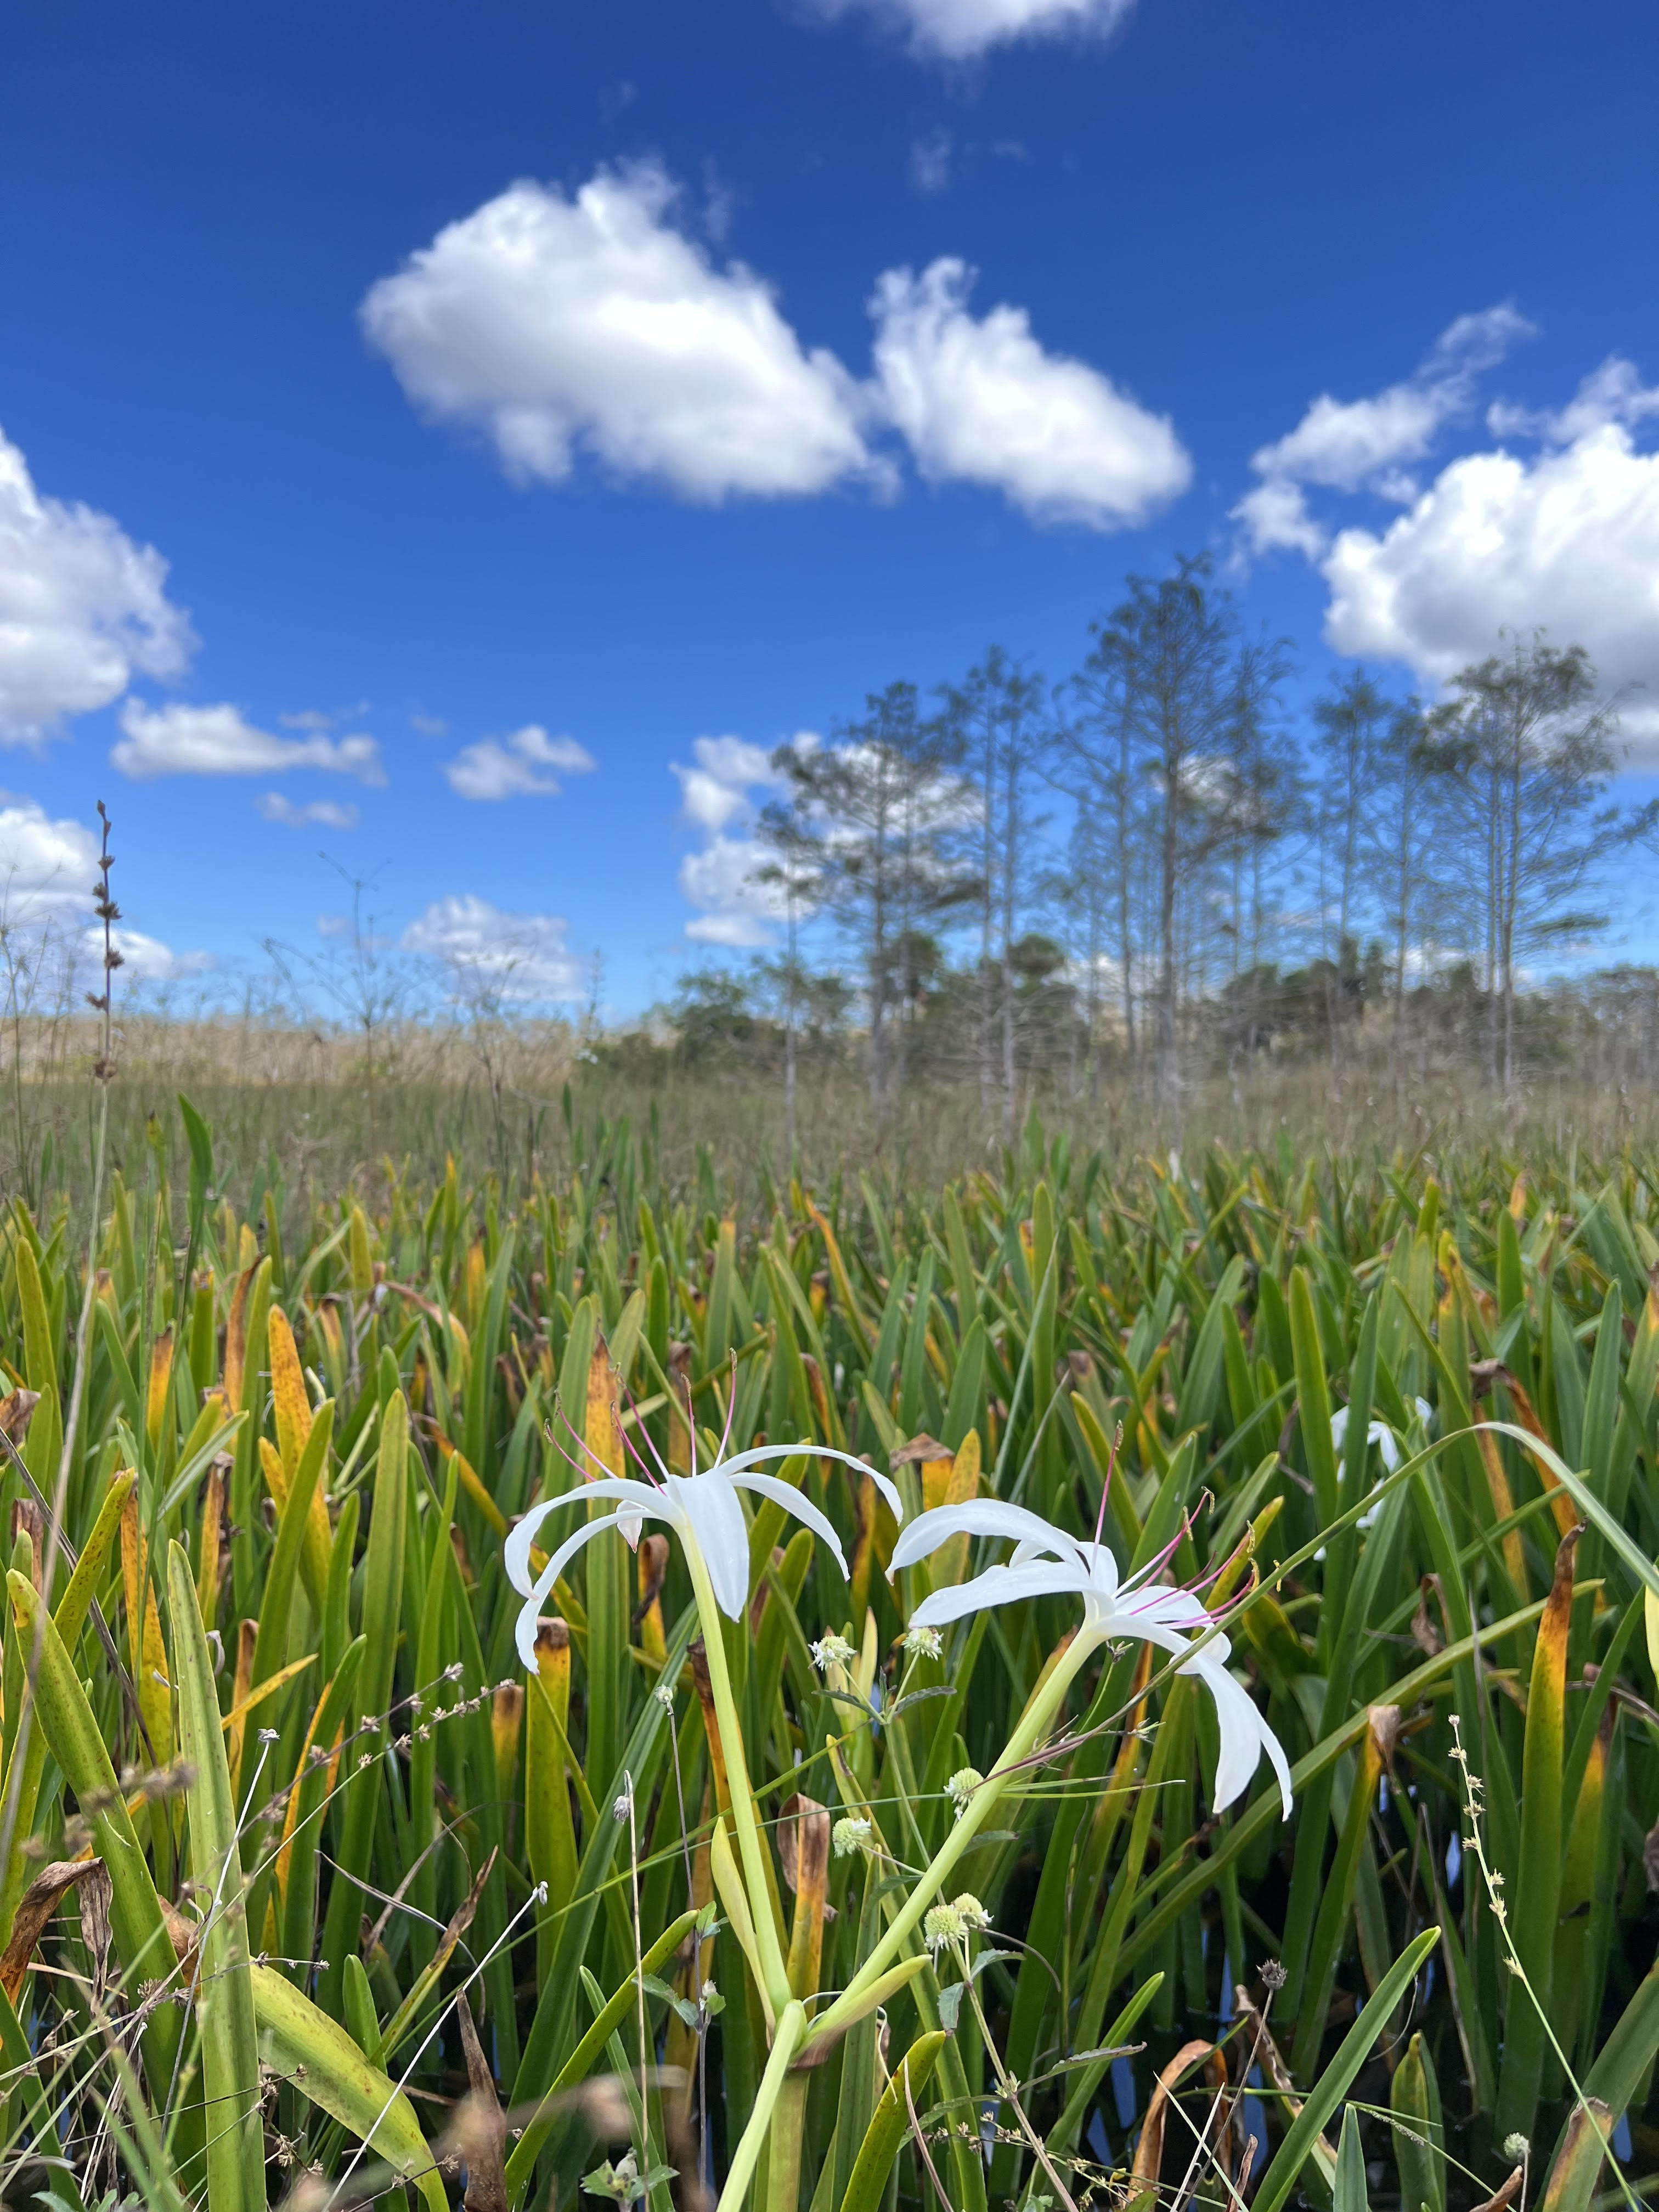 Two white flowers are seen in the foreground in front of a grassy field. In the distance, a small island of trees can be seen with a blue and cloudy sky overhead.